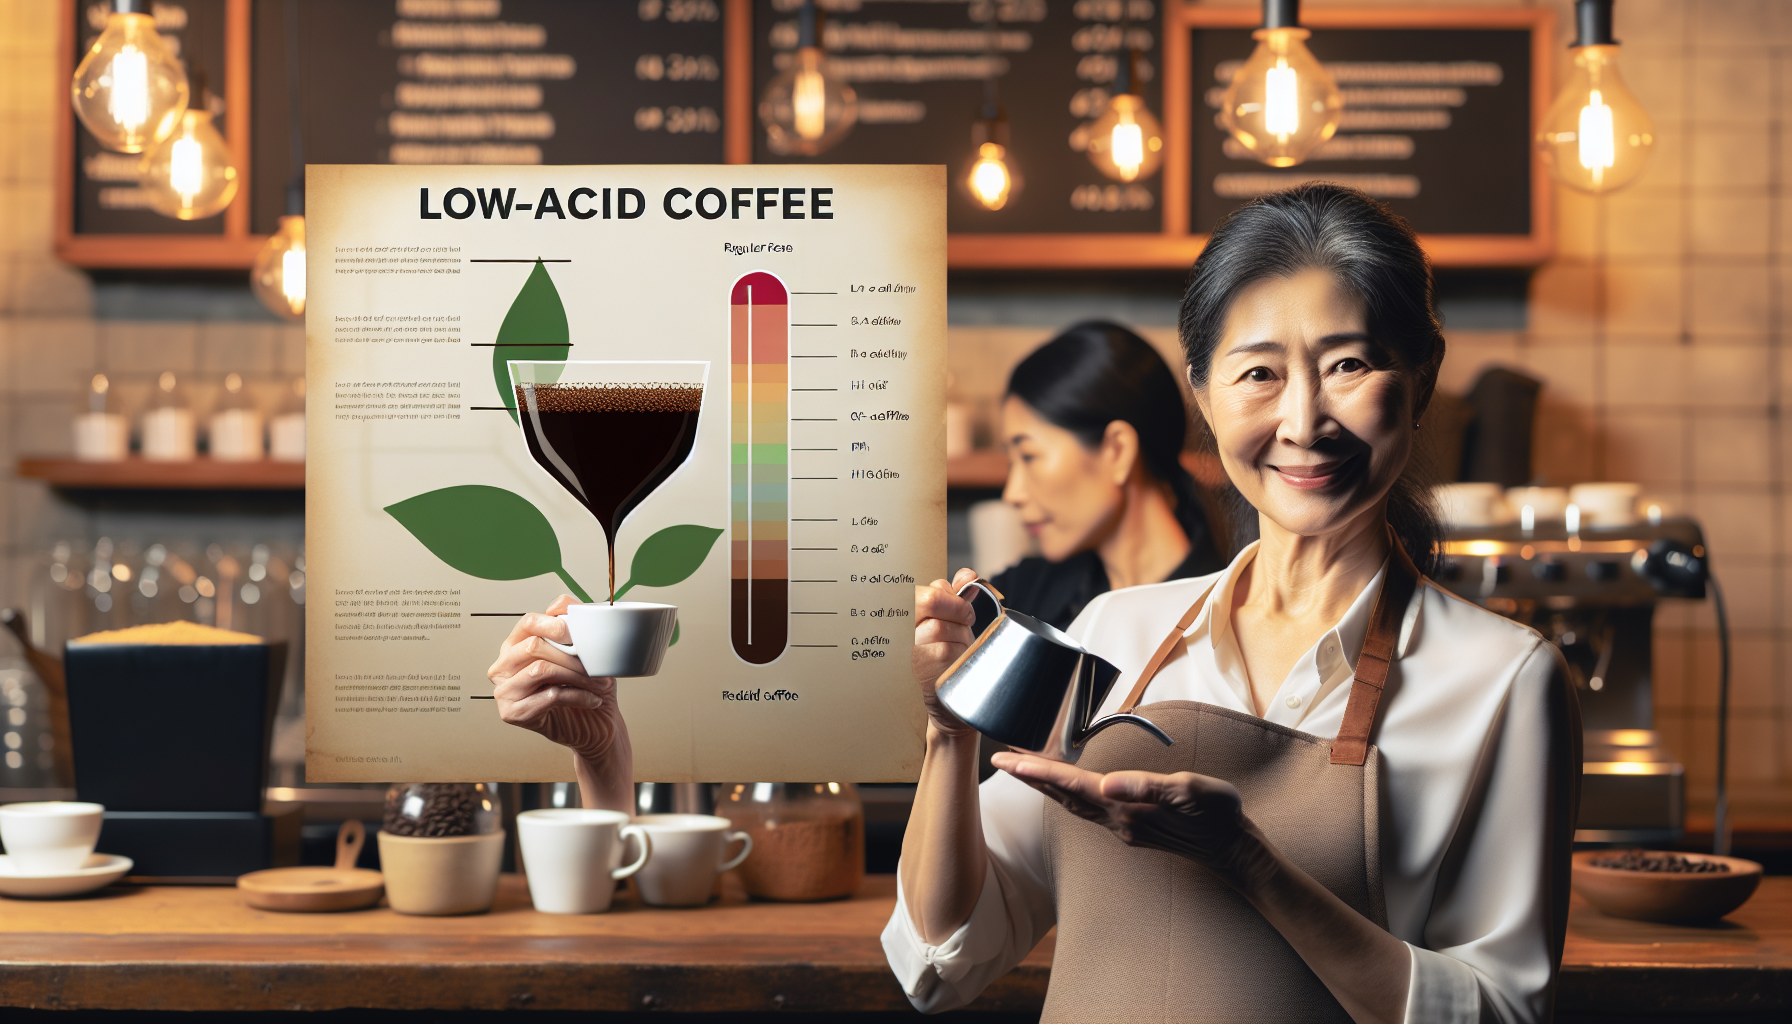 An in-depth exploration of a less known type of coffee: low-acid coffee. On one side of the picture, a mature female South Asian barista, who has a warm smile on her face and wears a smart, profession